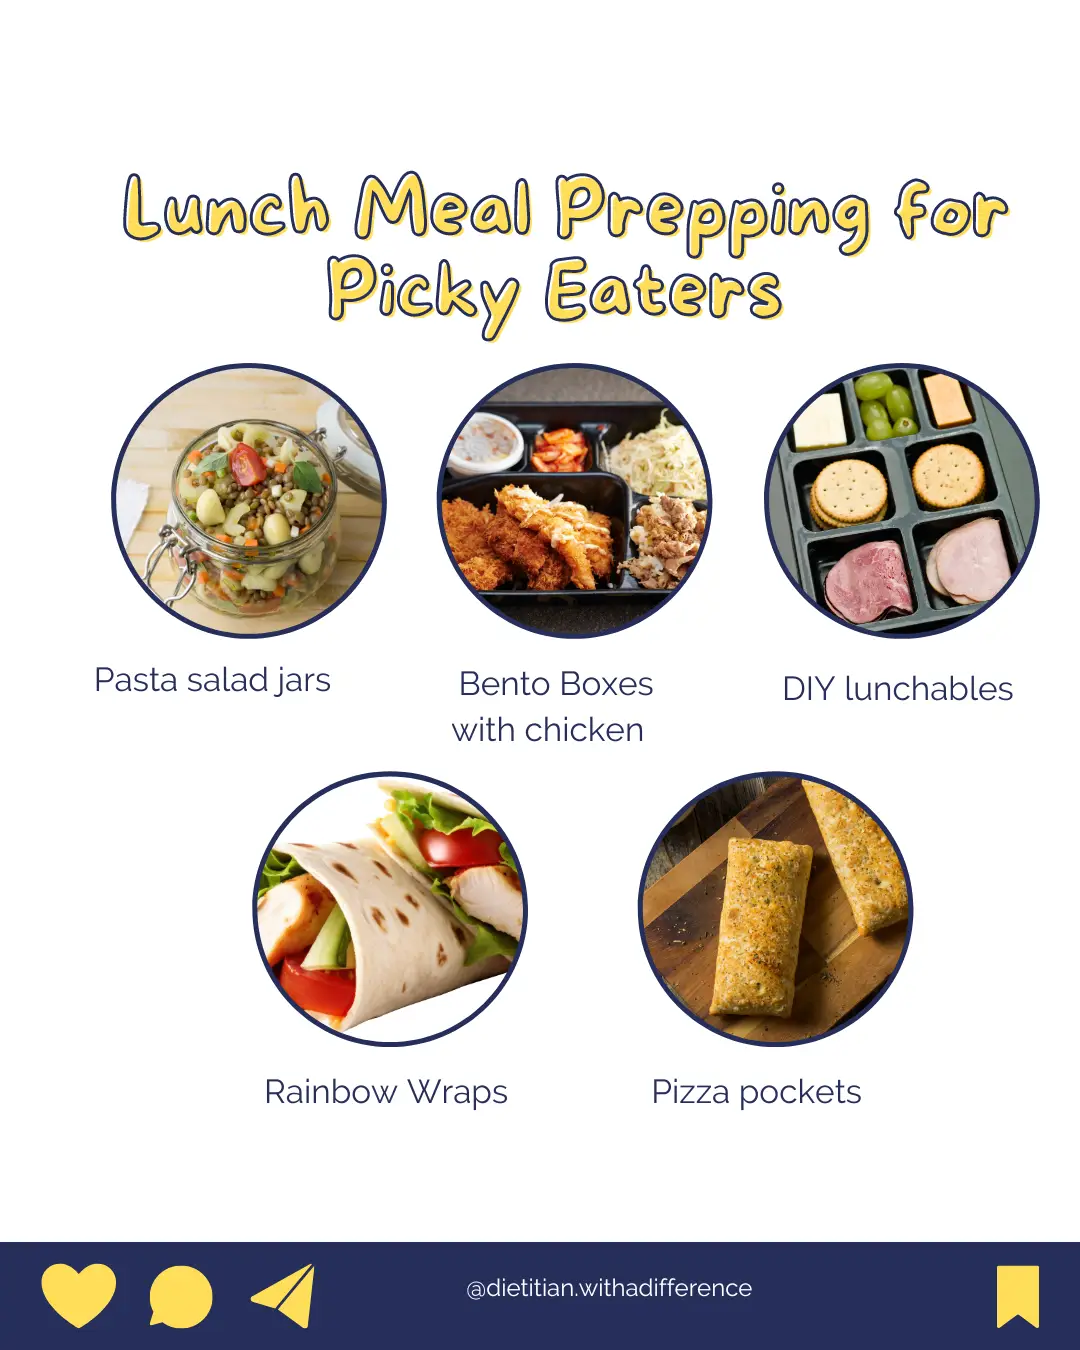 Lunch ideas - Meal prepping for picky eaters 